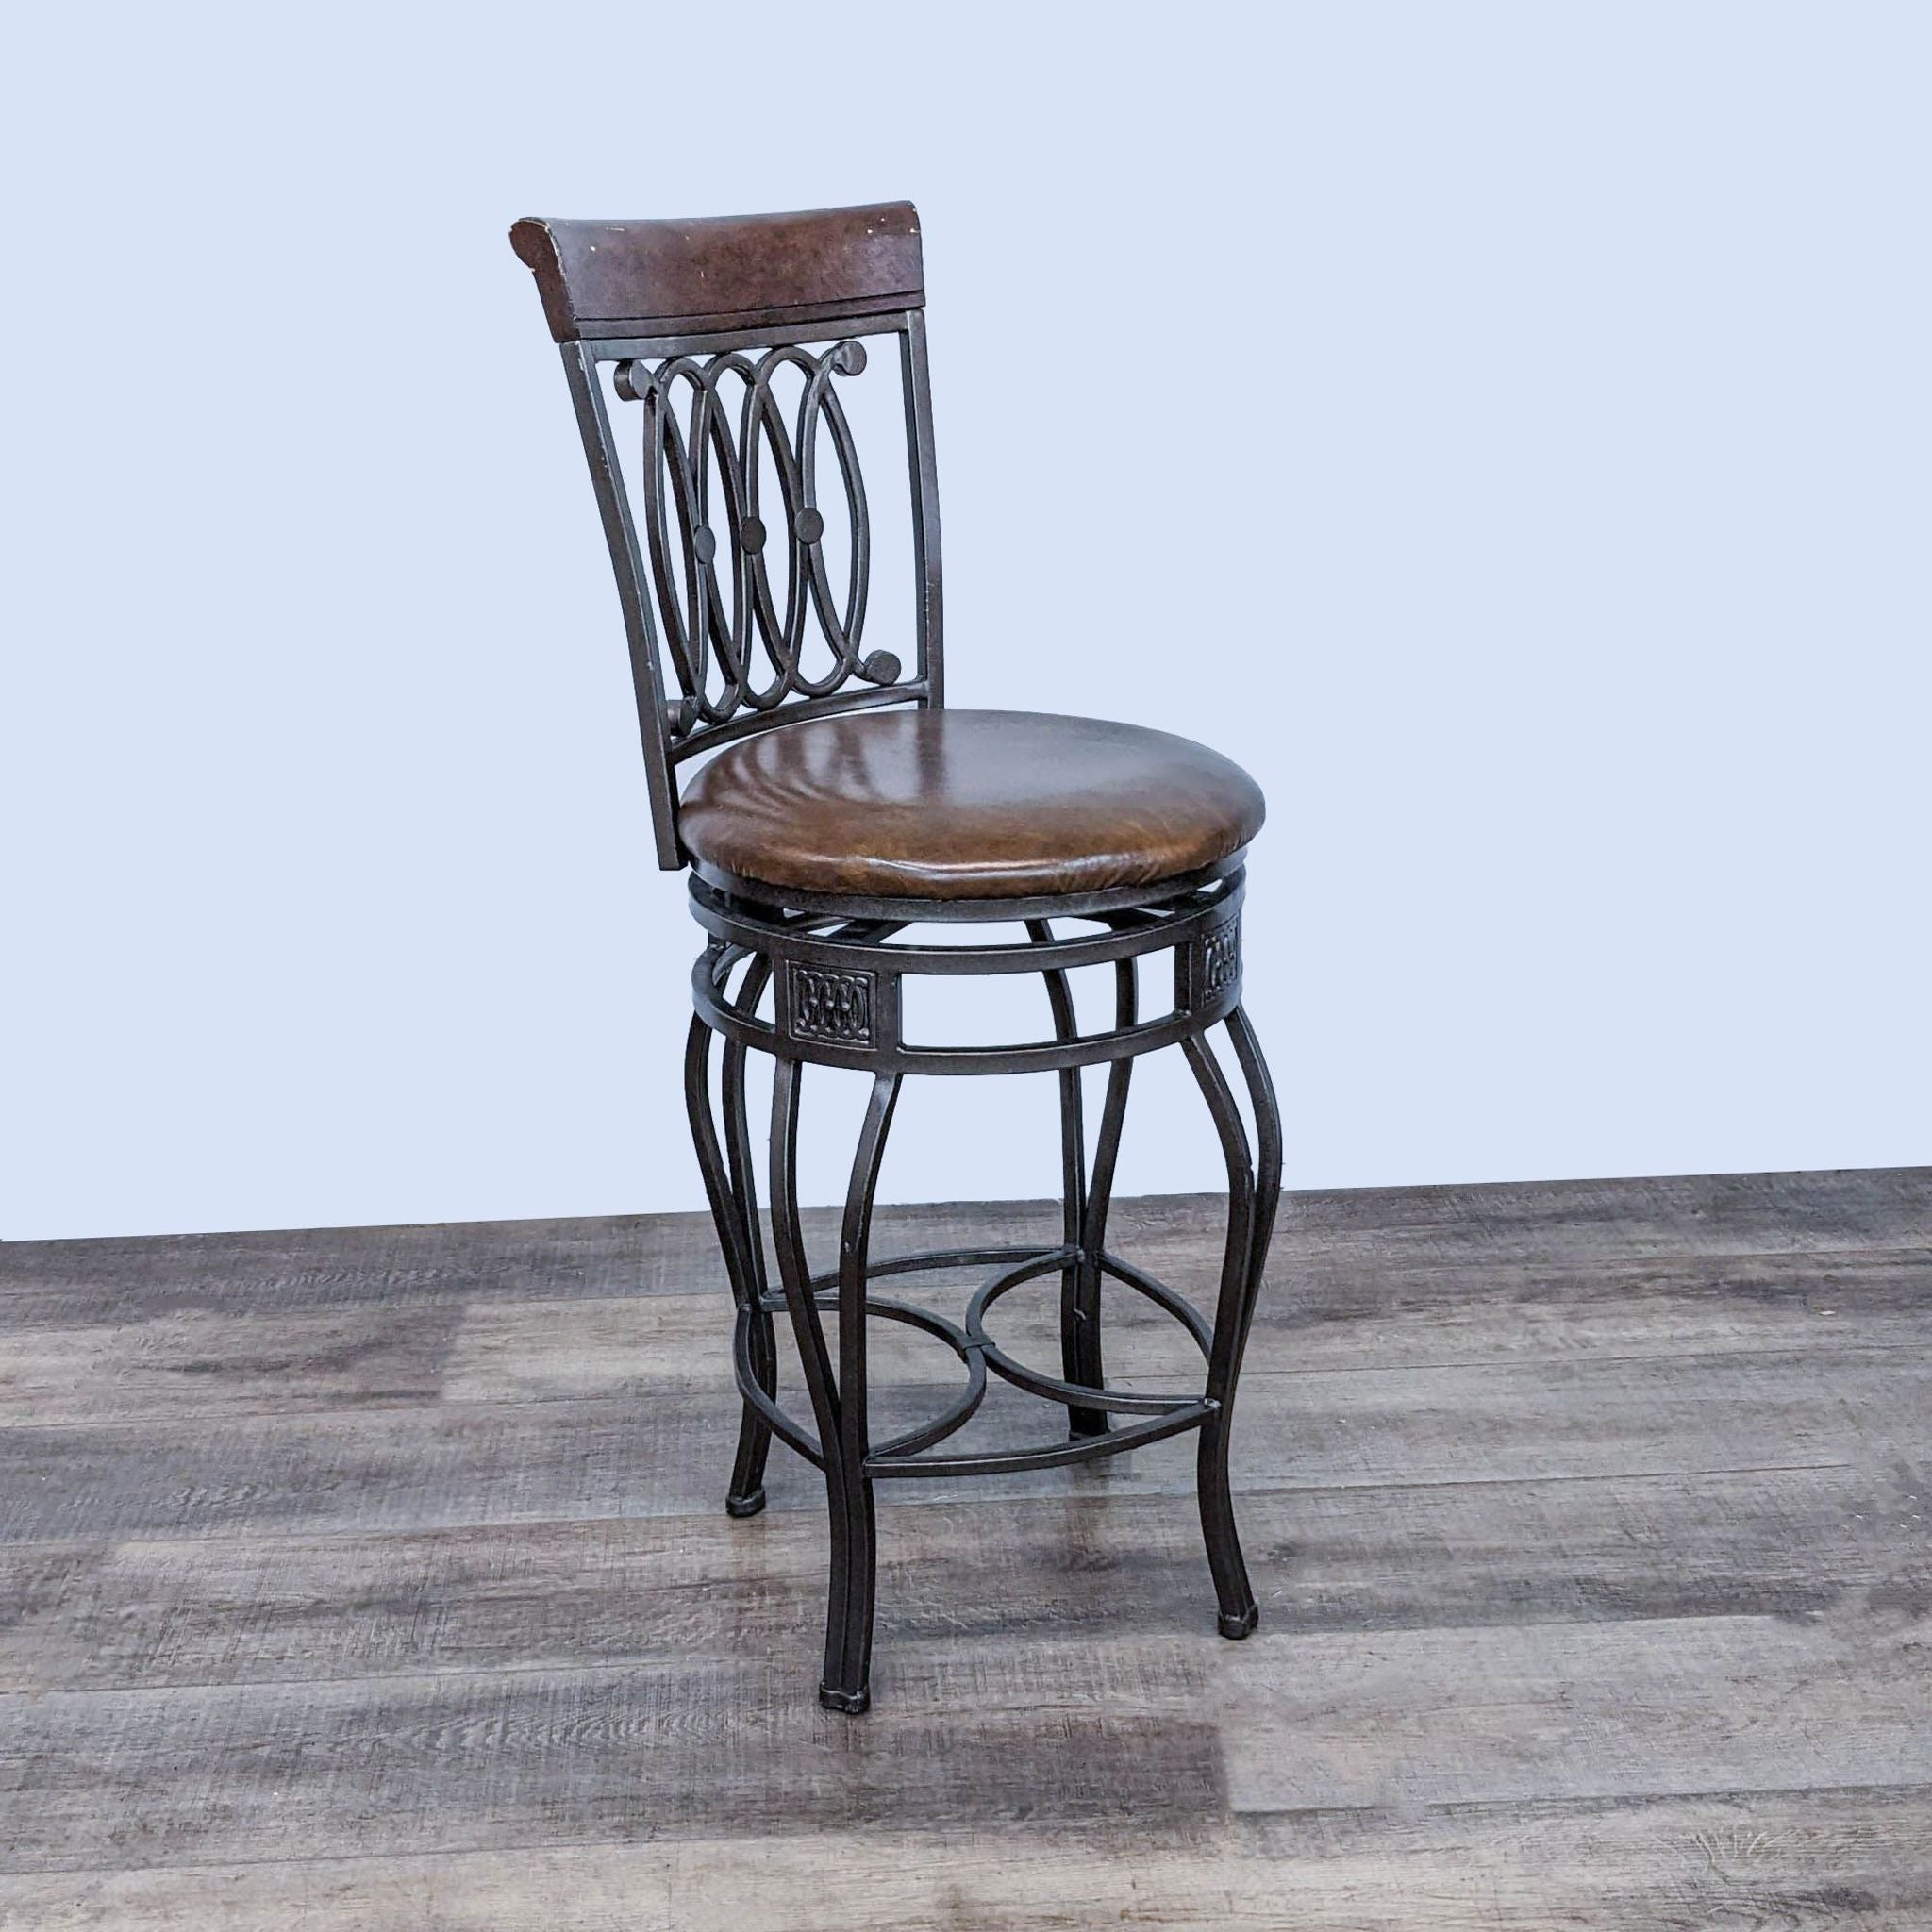 Elegant metal swivel barstool with cushioned seat and wood backrest by Reperch, on a wooden surface.